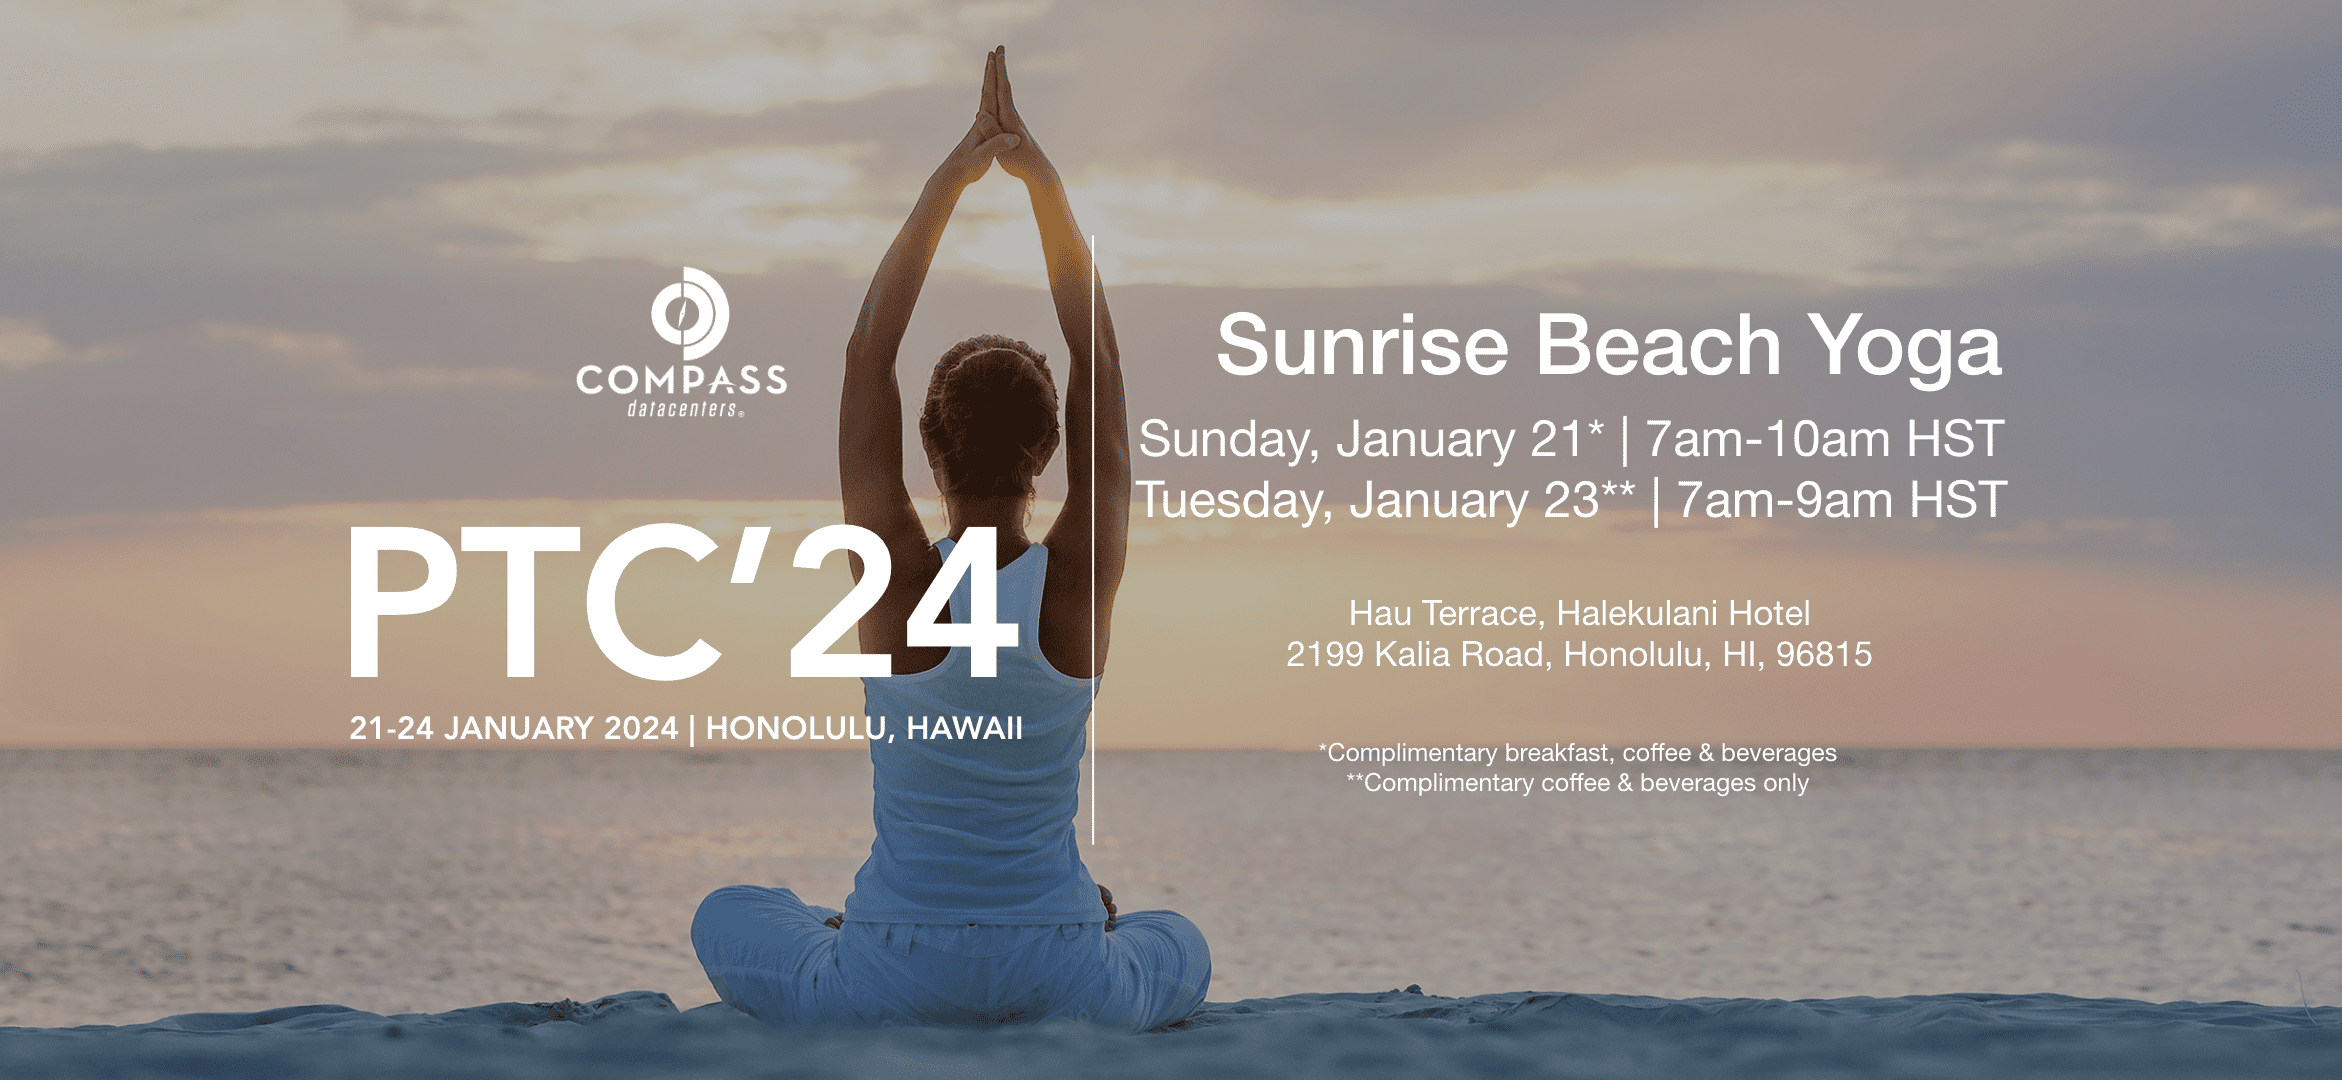 An advertisement for Sunrise Beach Yoga in Honolulu, Hawaii shows a person practicing yoga at dawn with event details and sponsor logos overlaid.